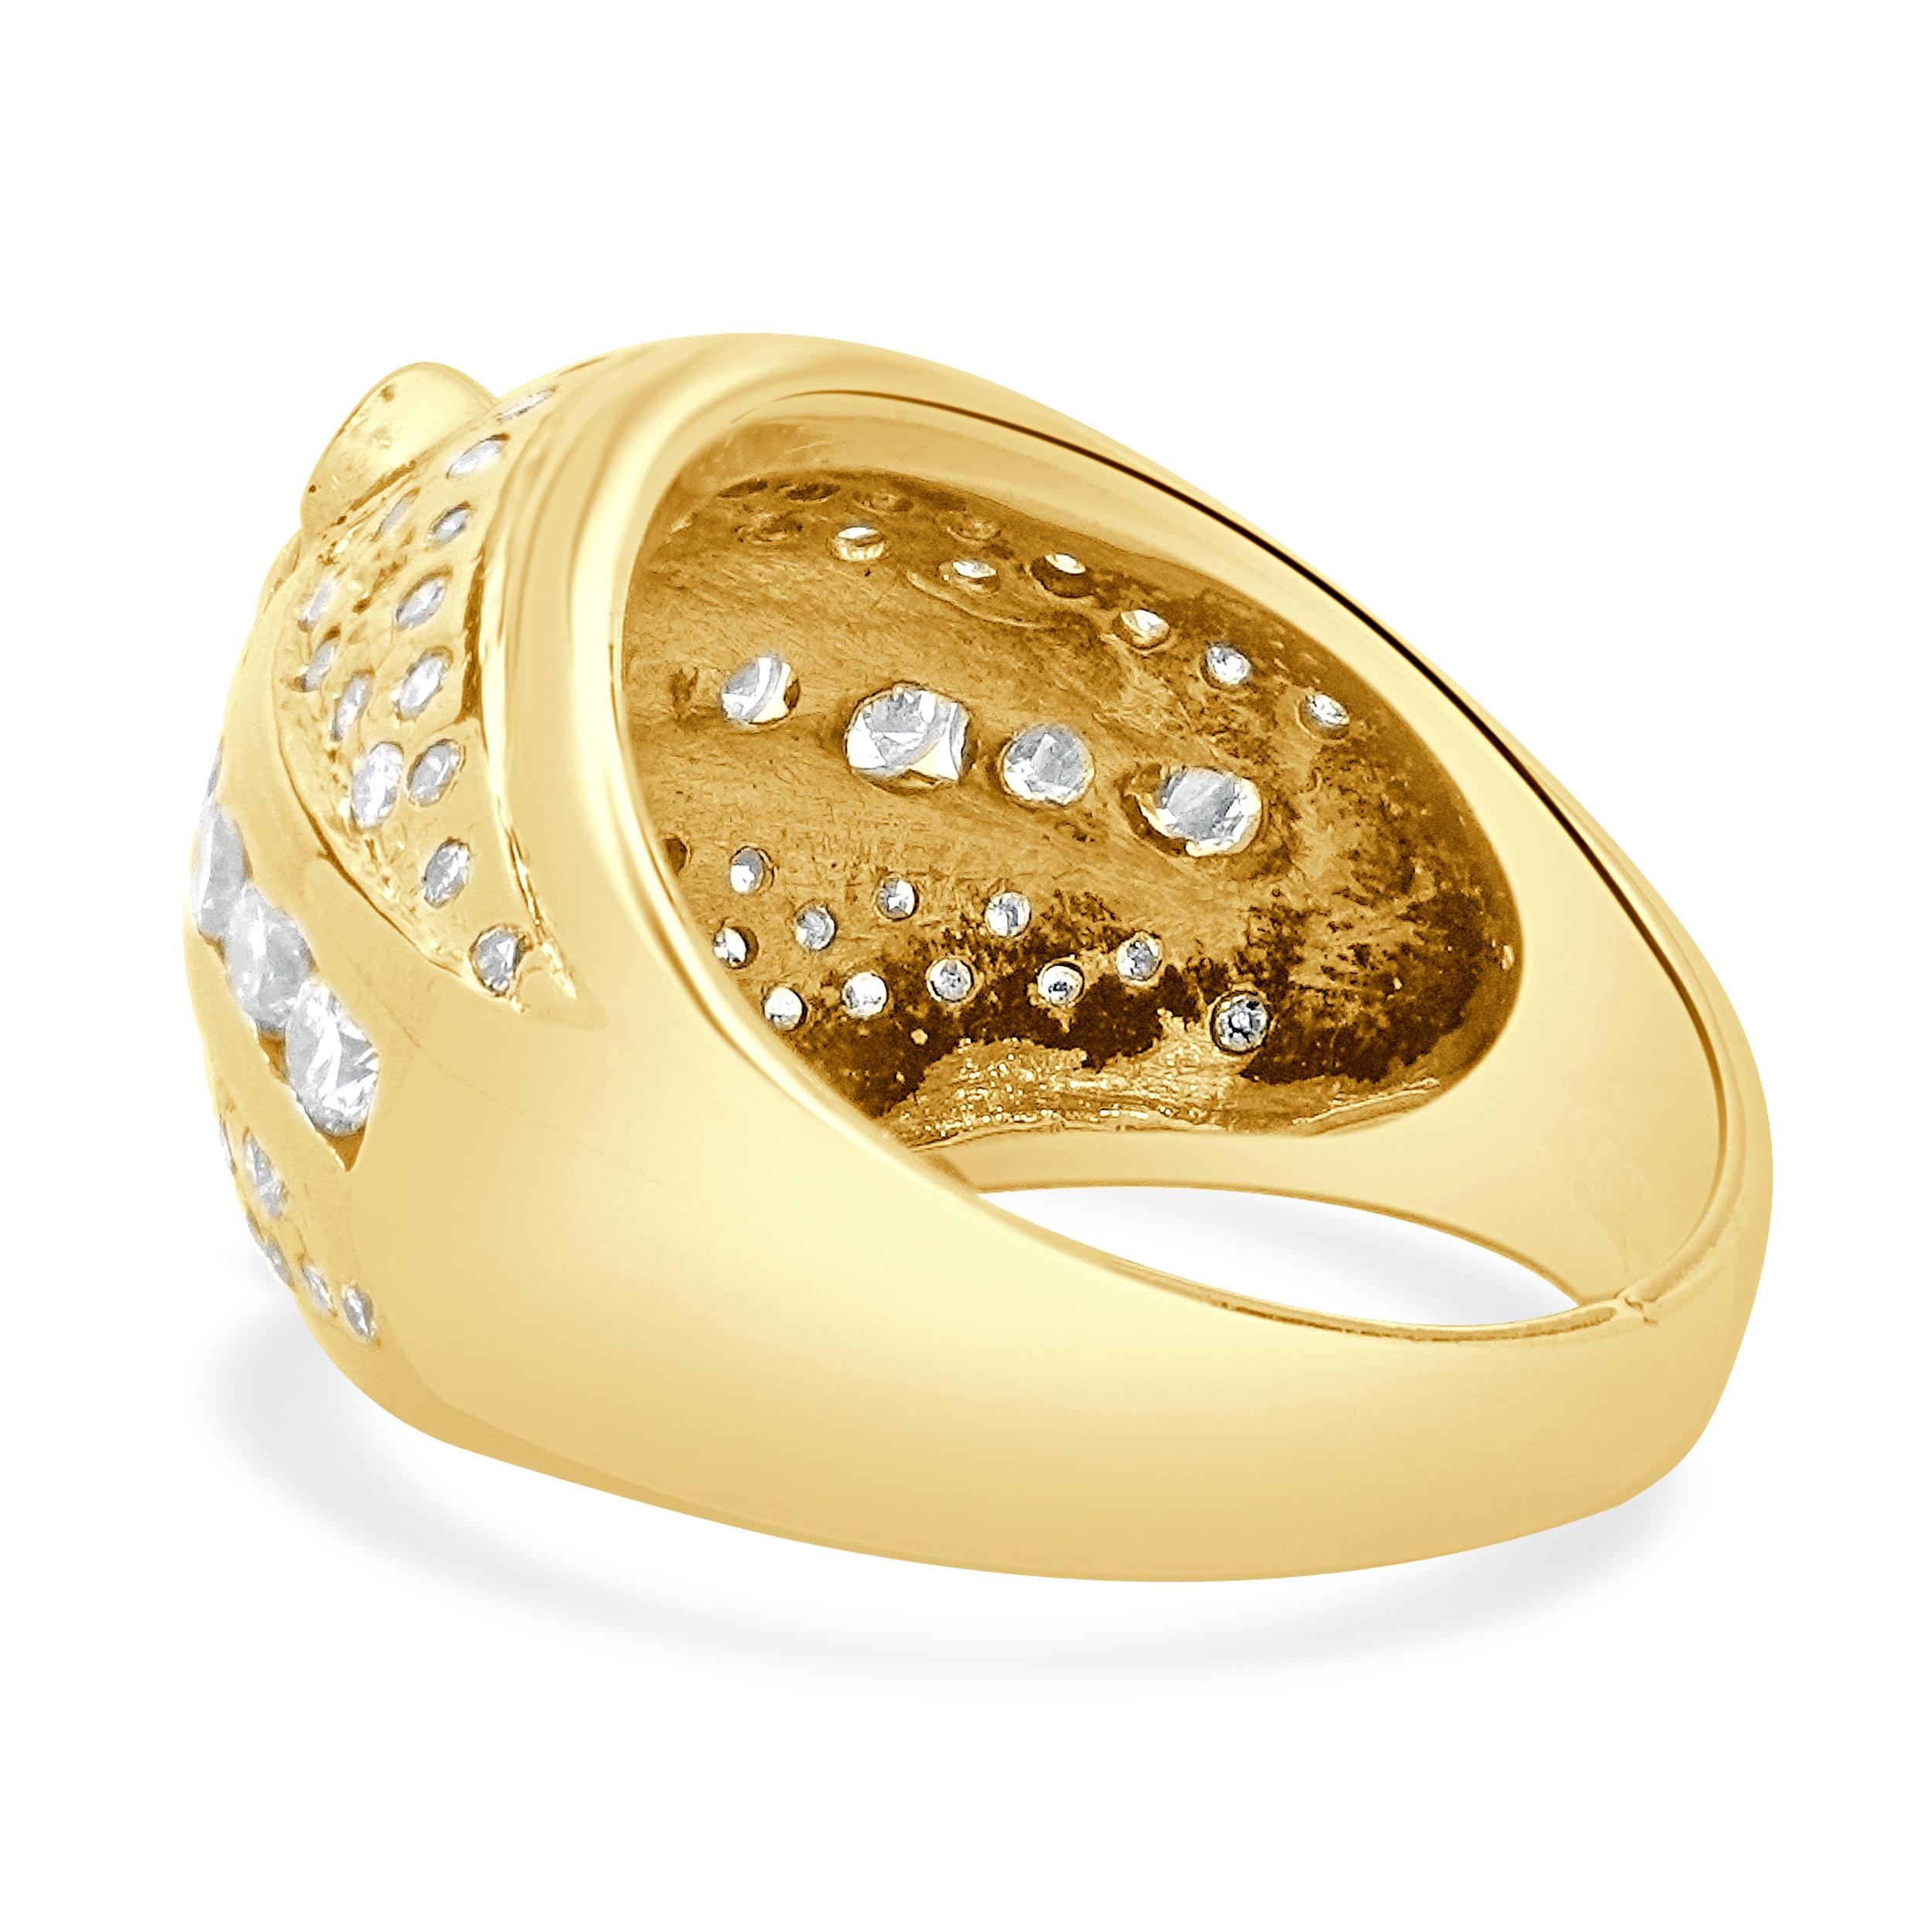 14 Karat Yellow Gold Marquise Cut Pave Diamond Dome Ring In Excellent Condition For Sale In Scottsdale, AZ